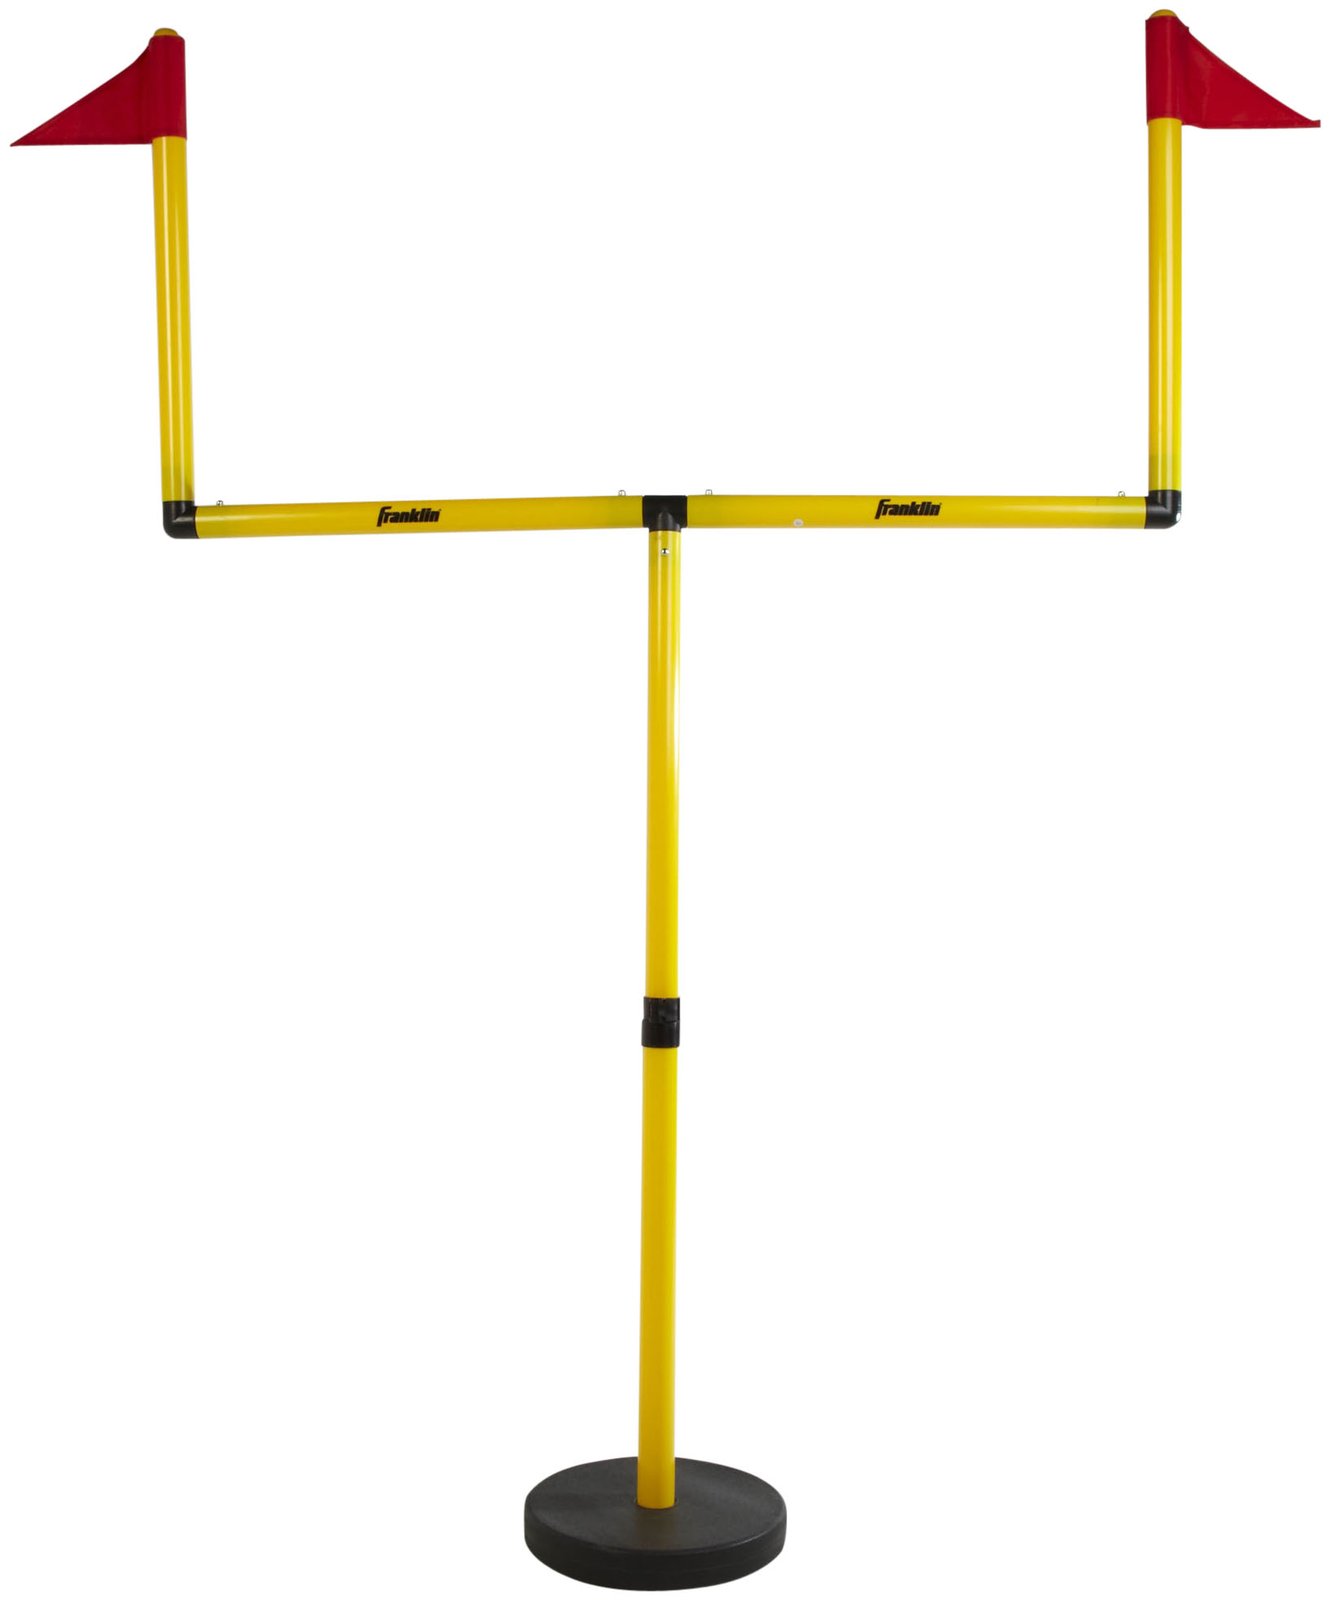 free clipart football goal posts - photo #10